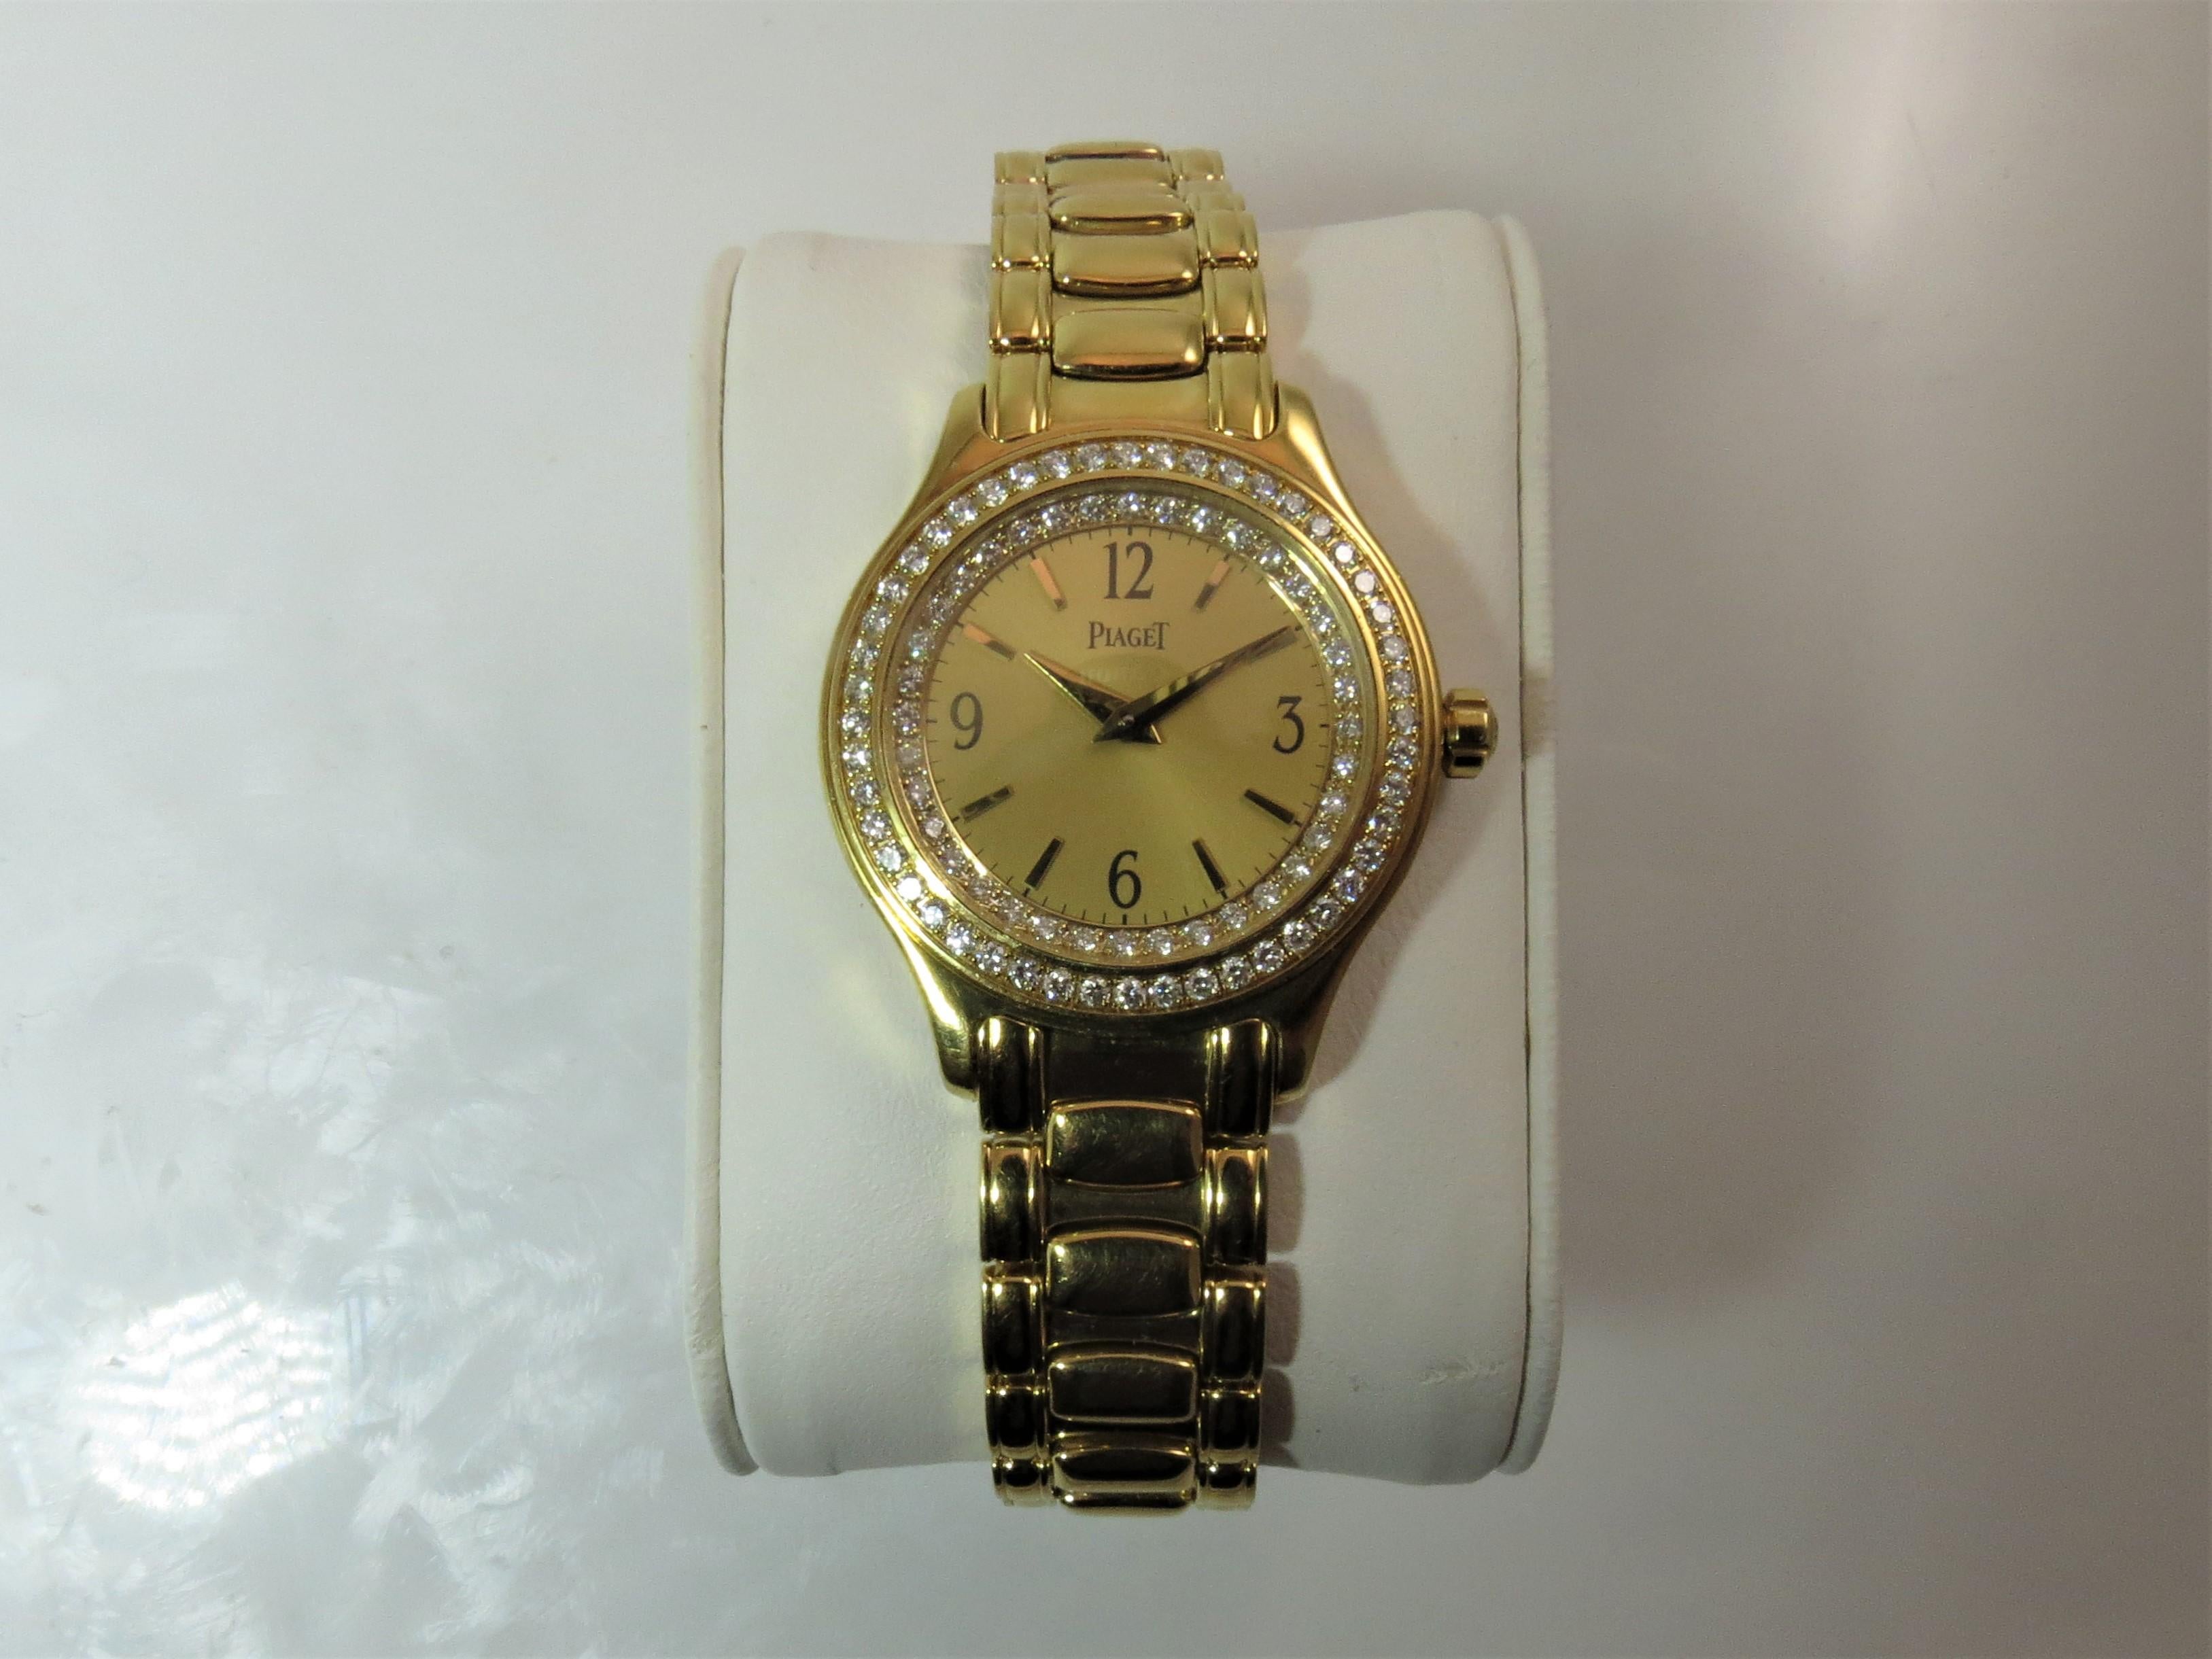 Brand new, never worn 18K yellow gold Piaget bracelet watch, with double row diamond bezel, quartz movement, gilt dial, case size 27mm, Style 01G0A21166, Serial #646676, Case Back 5805M201, 7.5 inches long.
Last retail $23,750